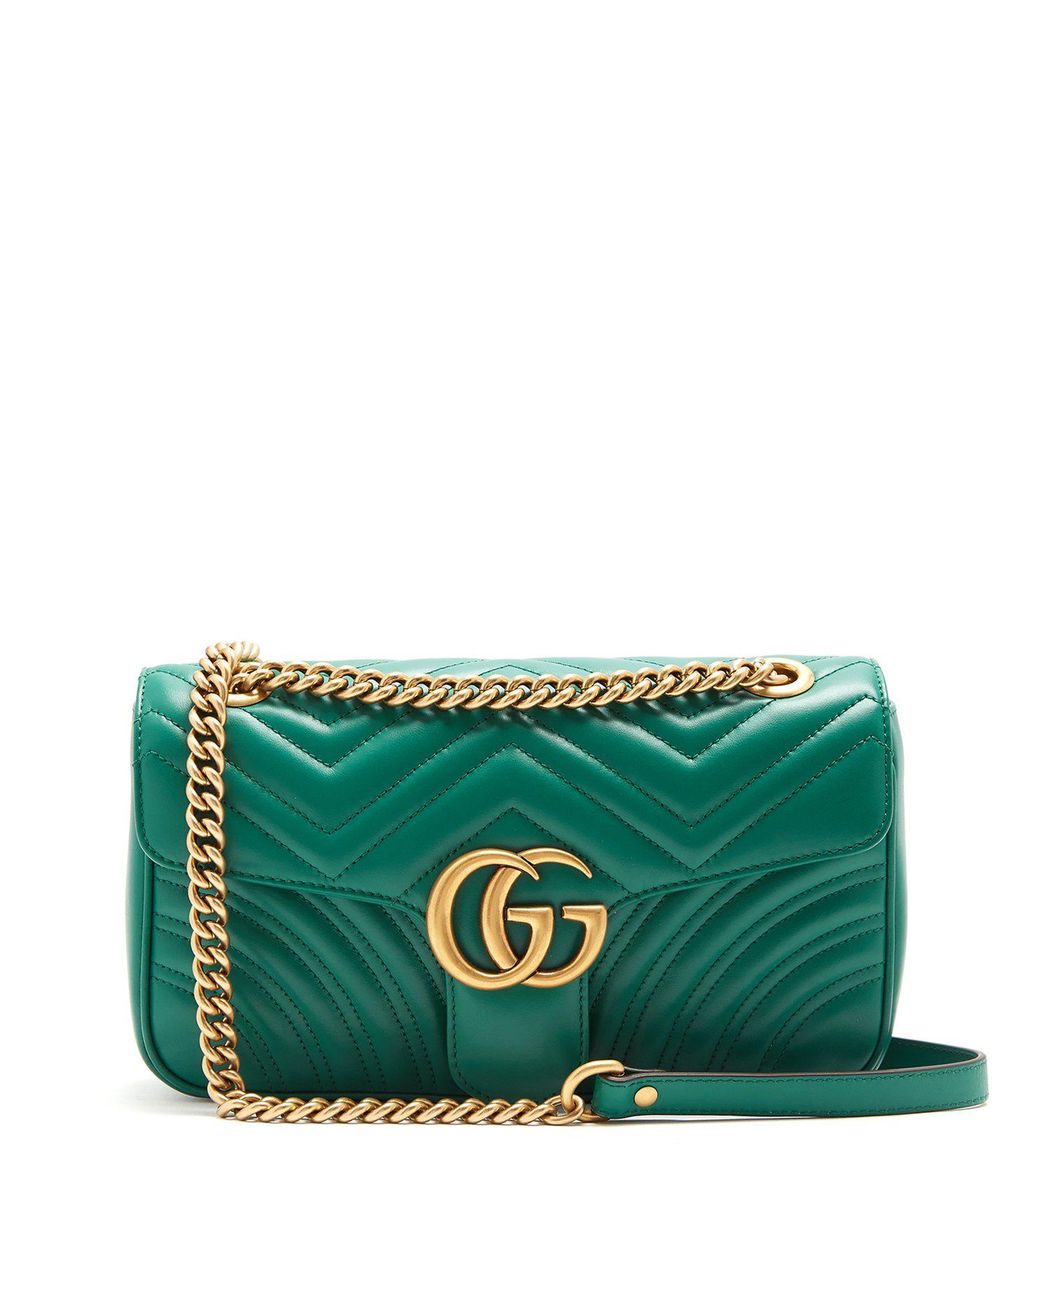 Gucci GG Marmont Small Shoulder Bag in Green | Lyst